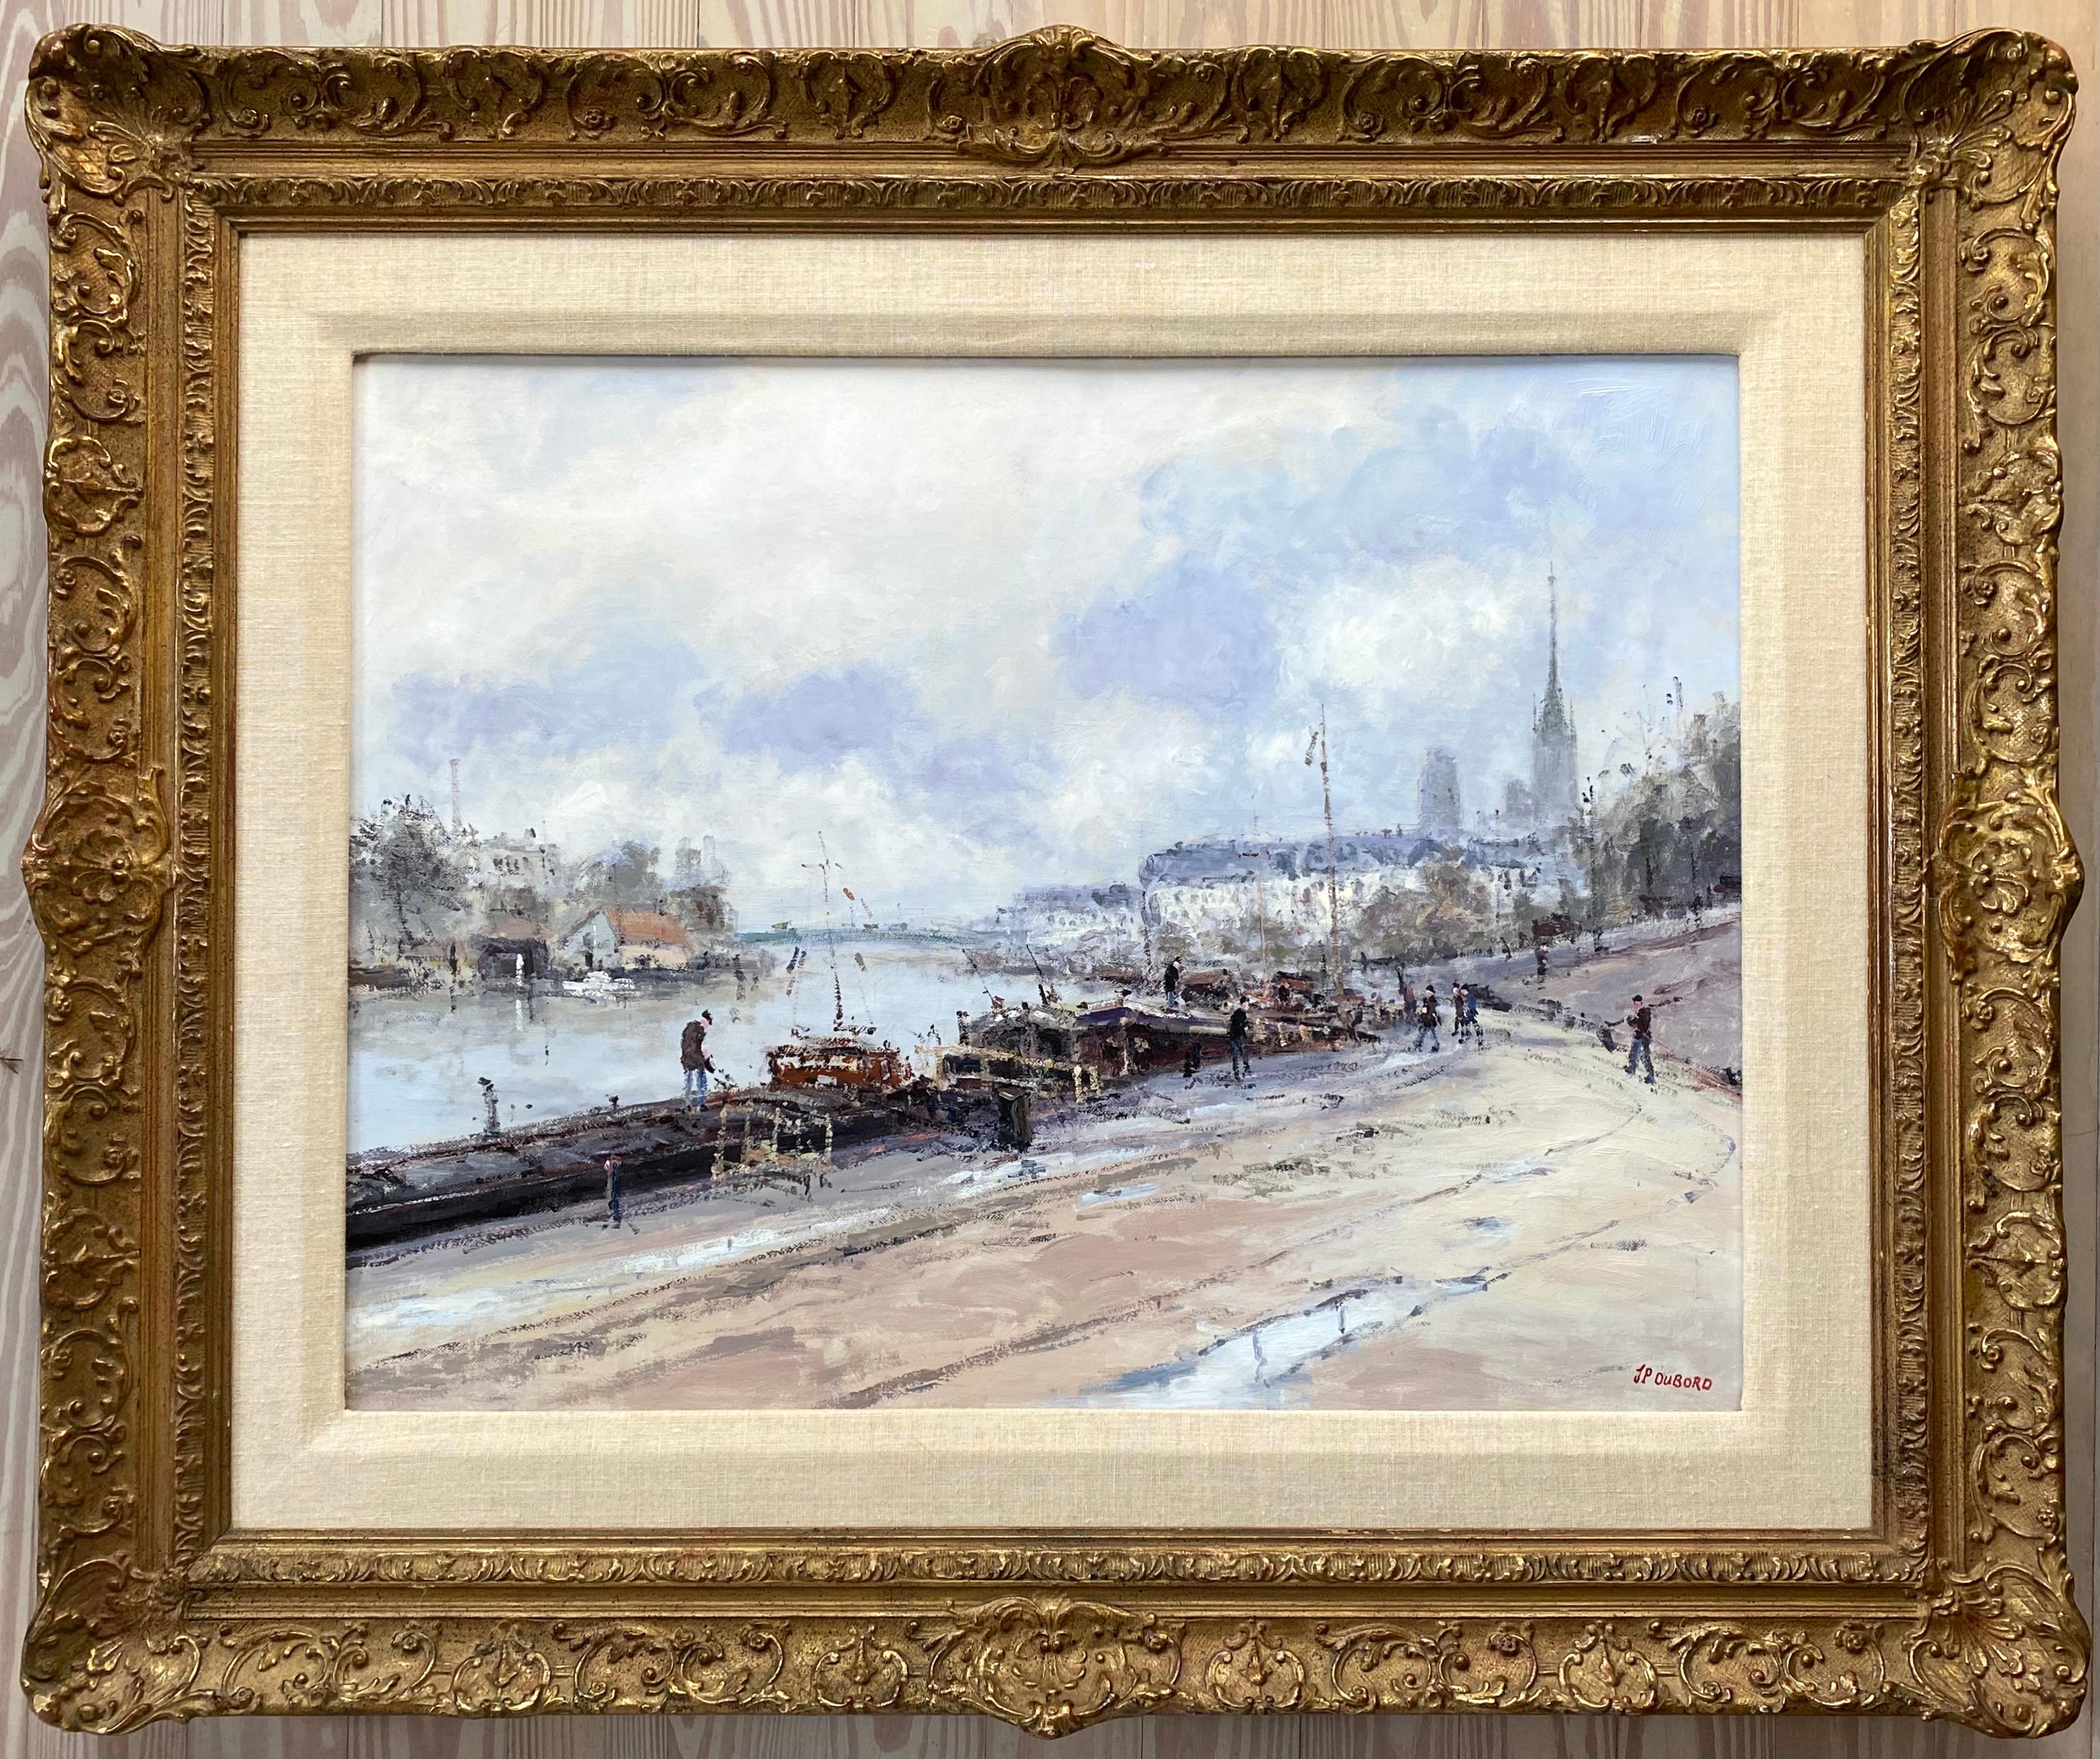 “Rouen on the Seine” - Painting by Jean Pierre Dubord